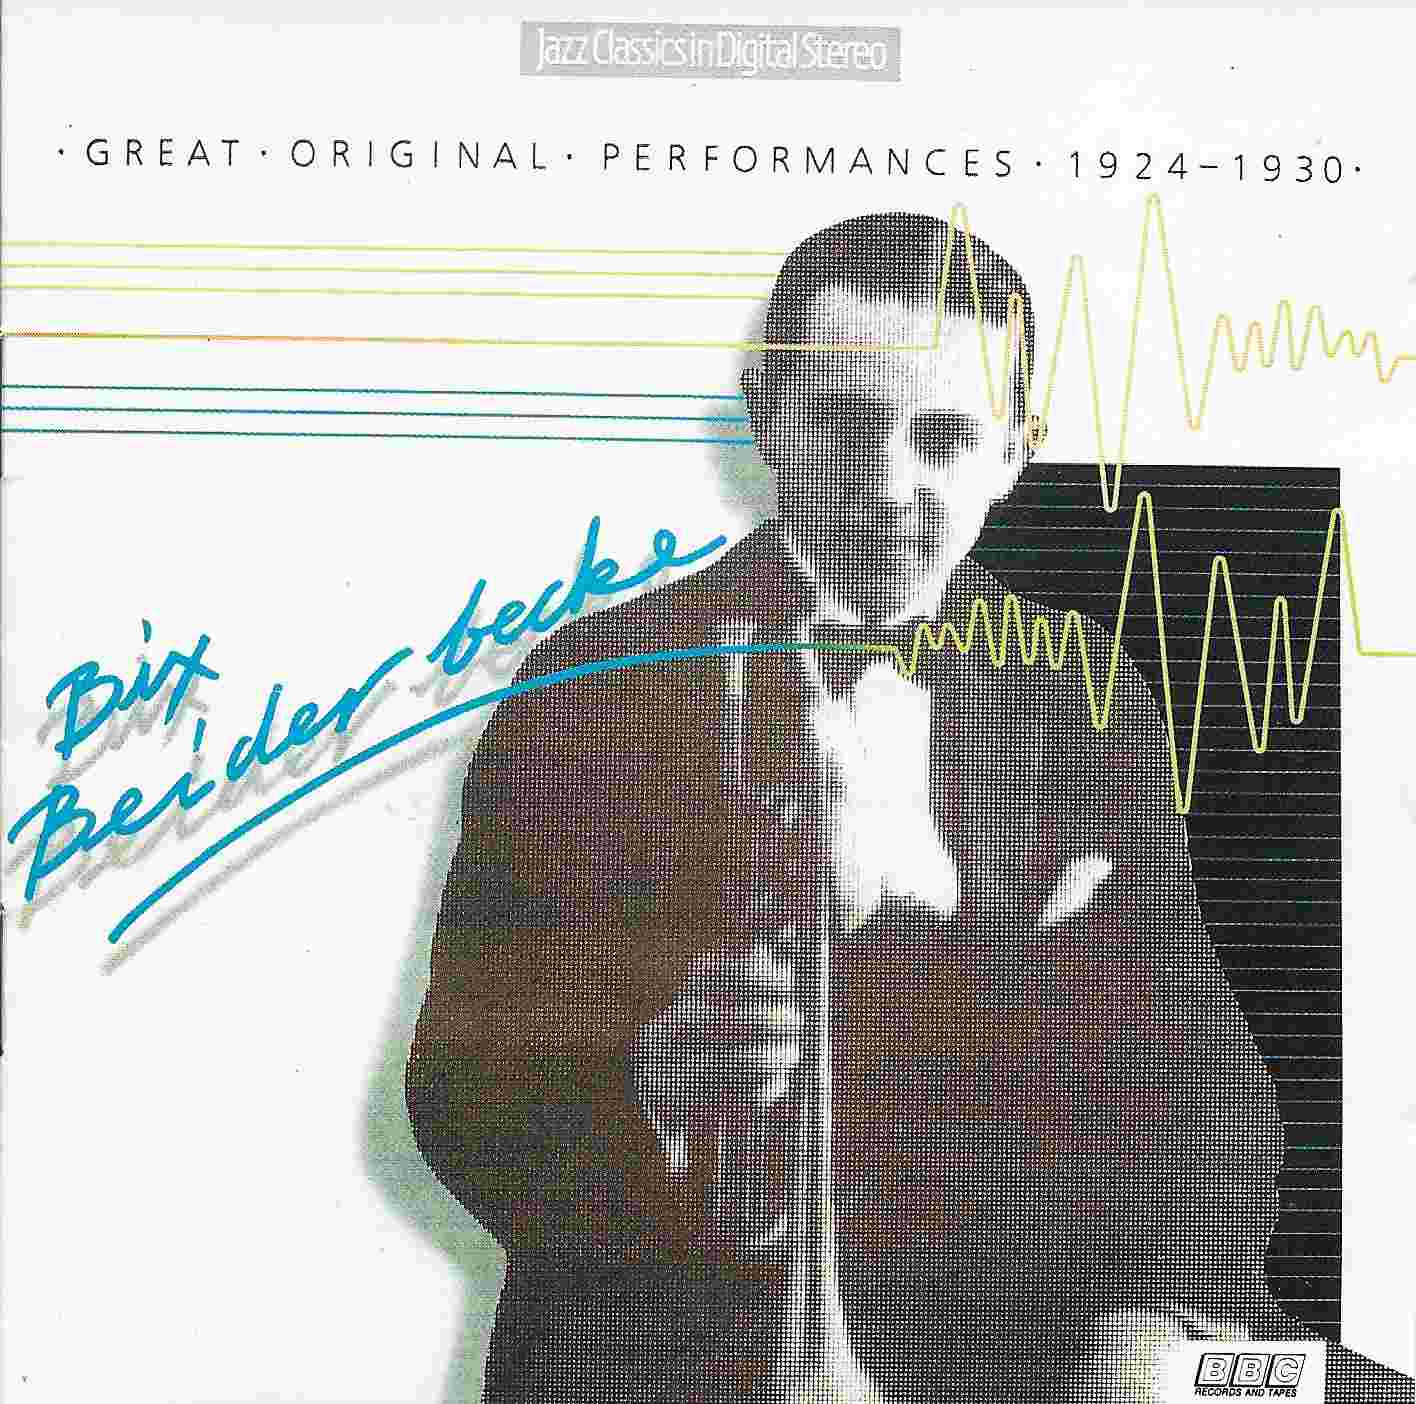 Picture of BBCCD601 Jazz Classics - Bix Beiderbecke by artist Bix Beiderbecke from the BBC cds - Records and Tapes library